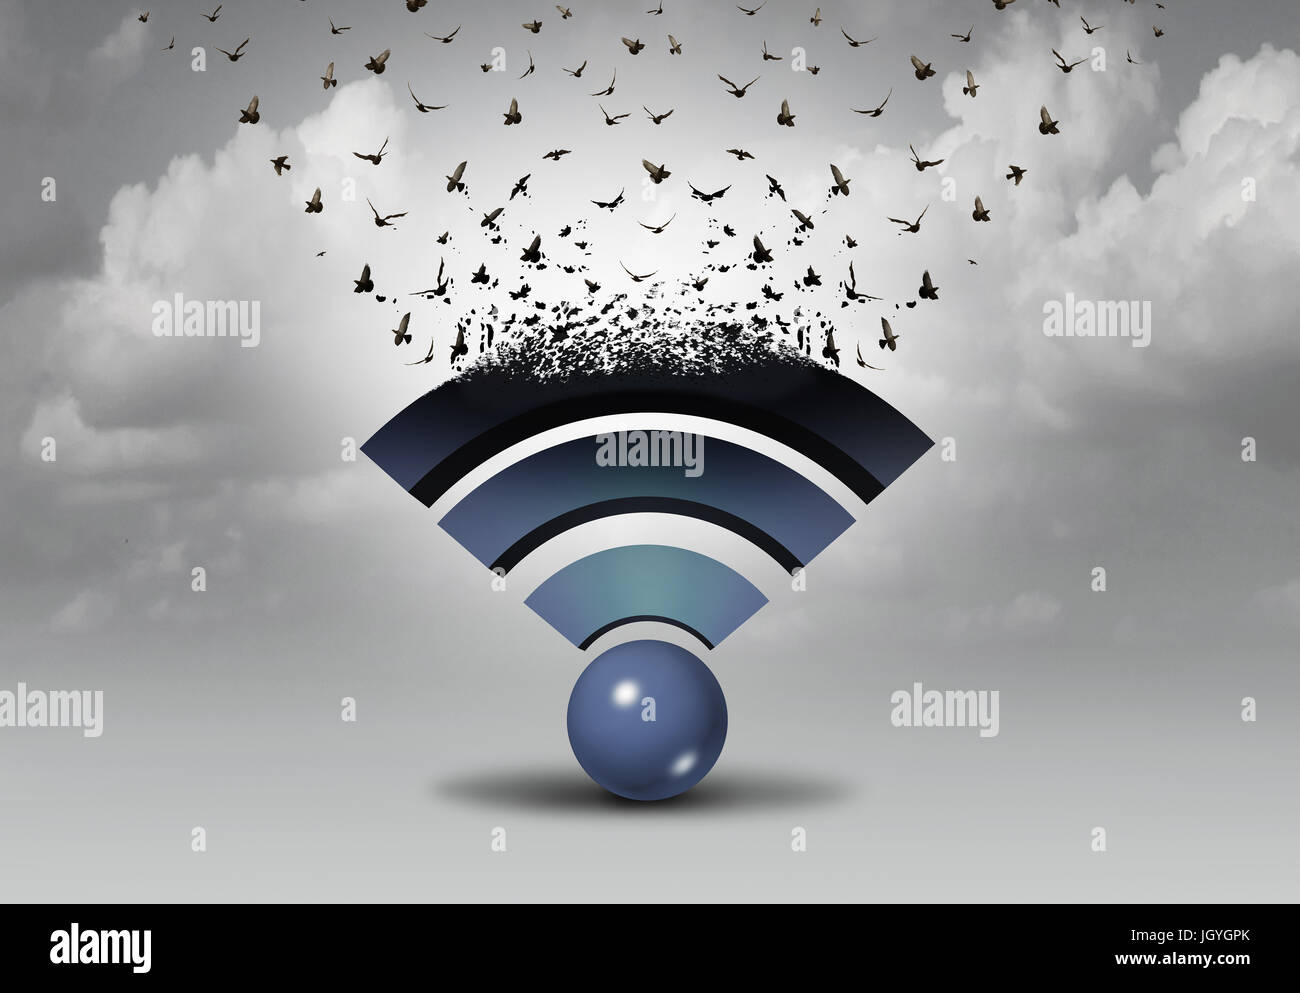 Wifi wireless distribution and internet technology expansion and data transfer as a mobile web icon transforming into flying birds as a media. Stock Photo